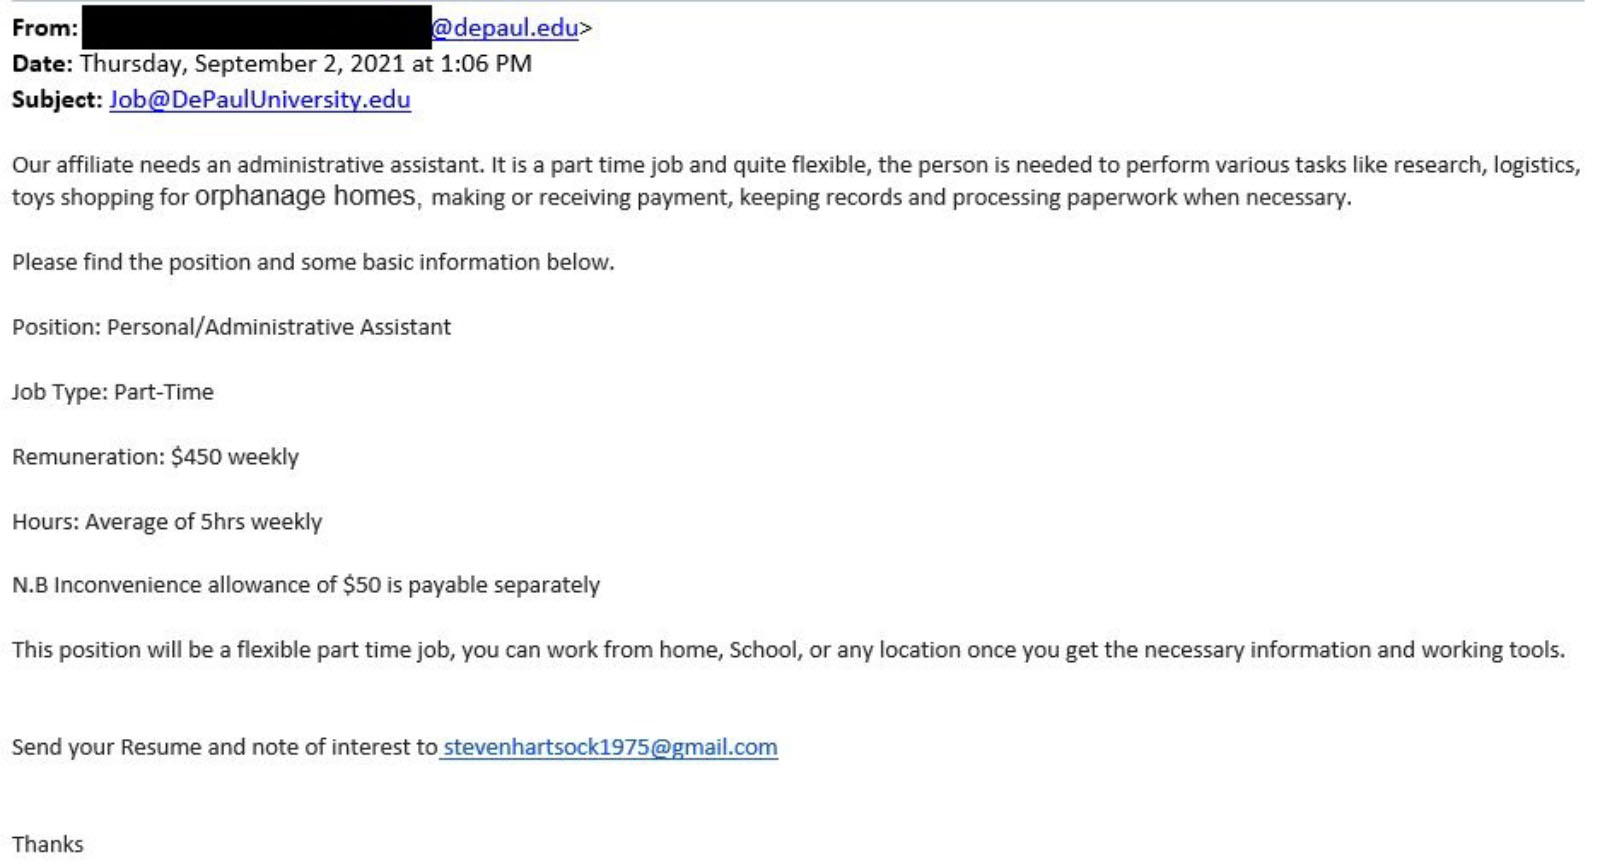 A screenshot of a malicious email. The malicious email attempts to trick recipients into applying for a fake personal assistant job.